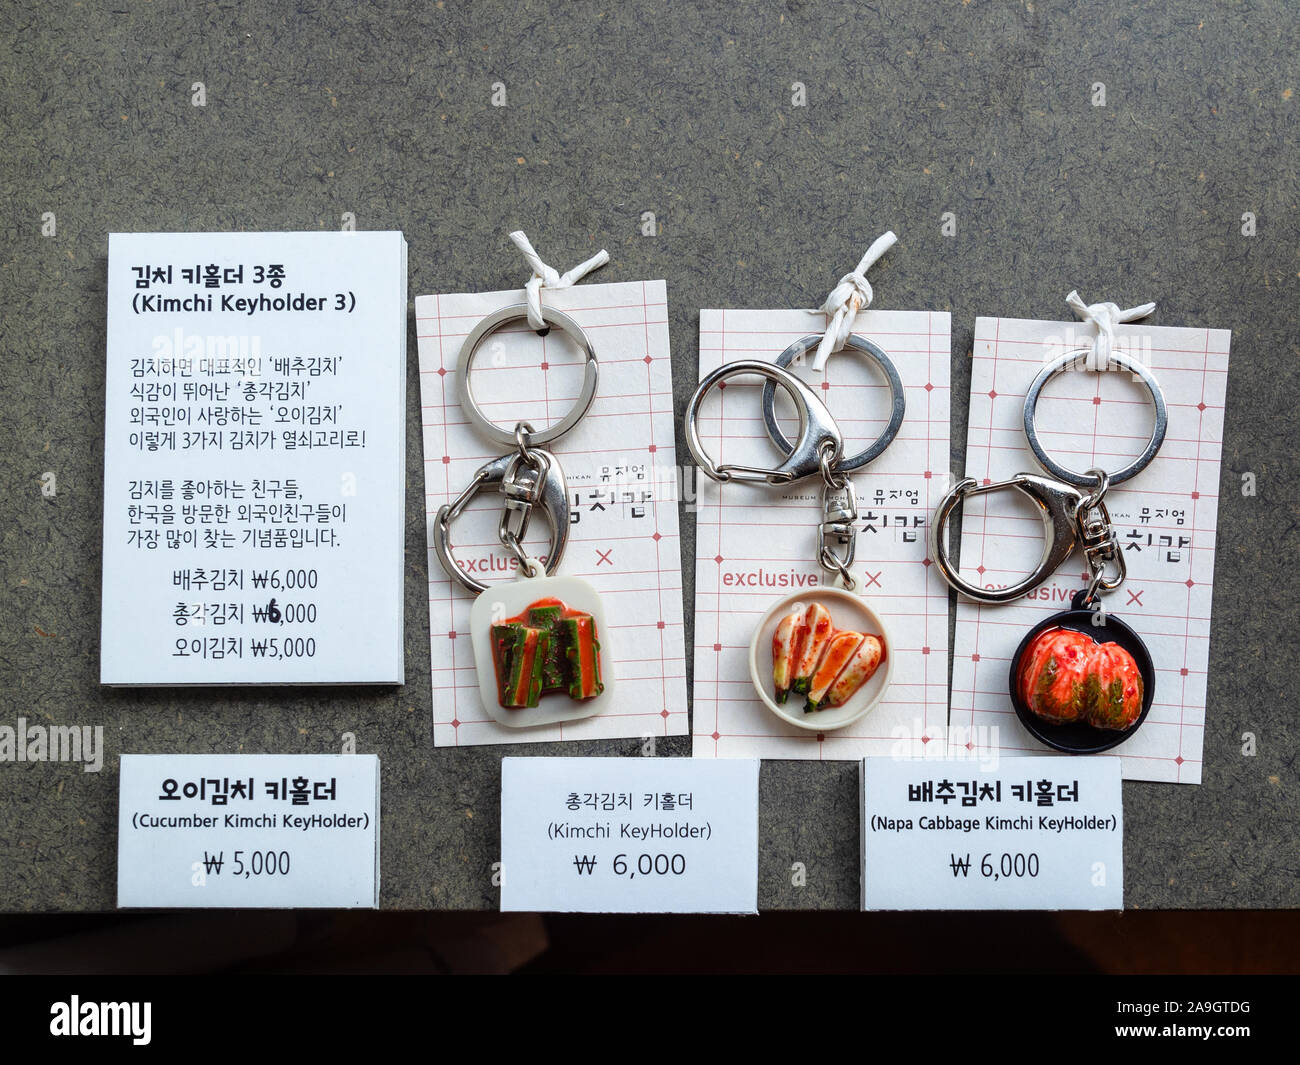 SEOUL, SOUTH KOREA - OCTOBER 30, 2019: souvenir ceramic keyholder with Kimchi figure in market in Insadong District of Seoul. Kimchi is famous traditi Stock Photo